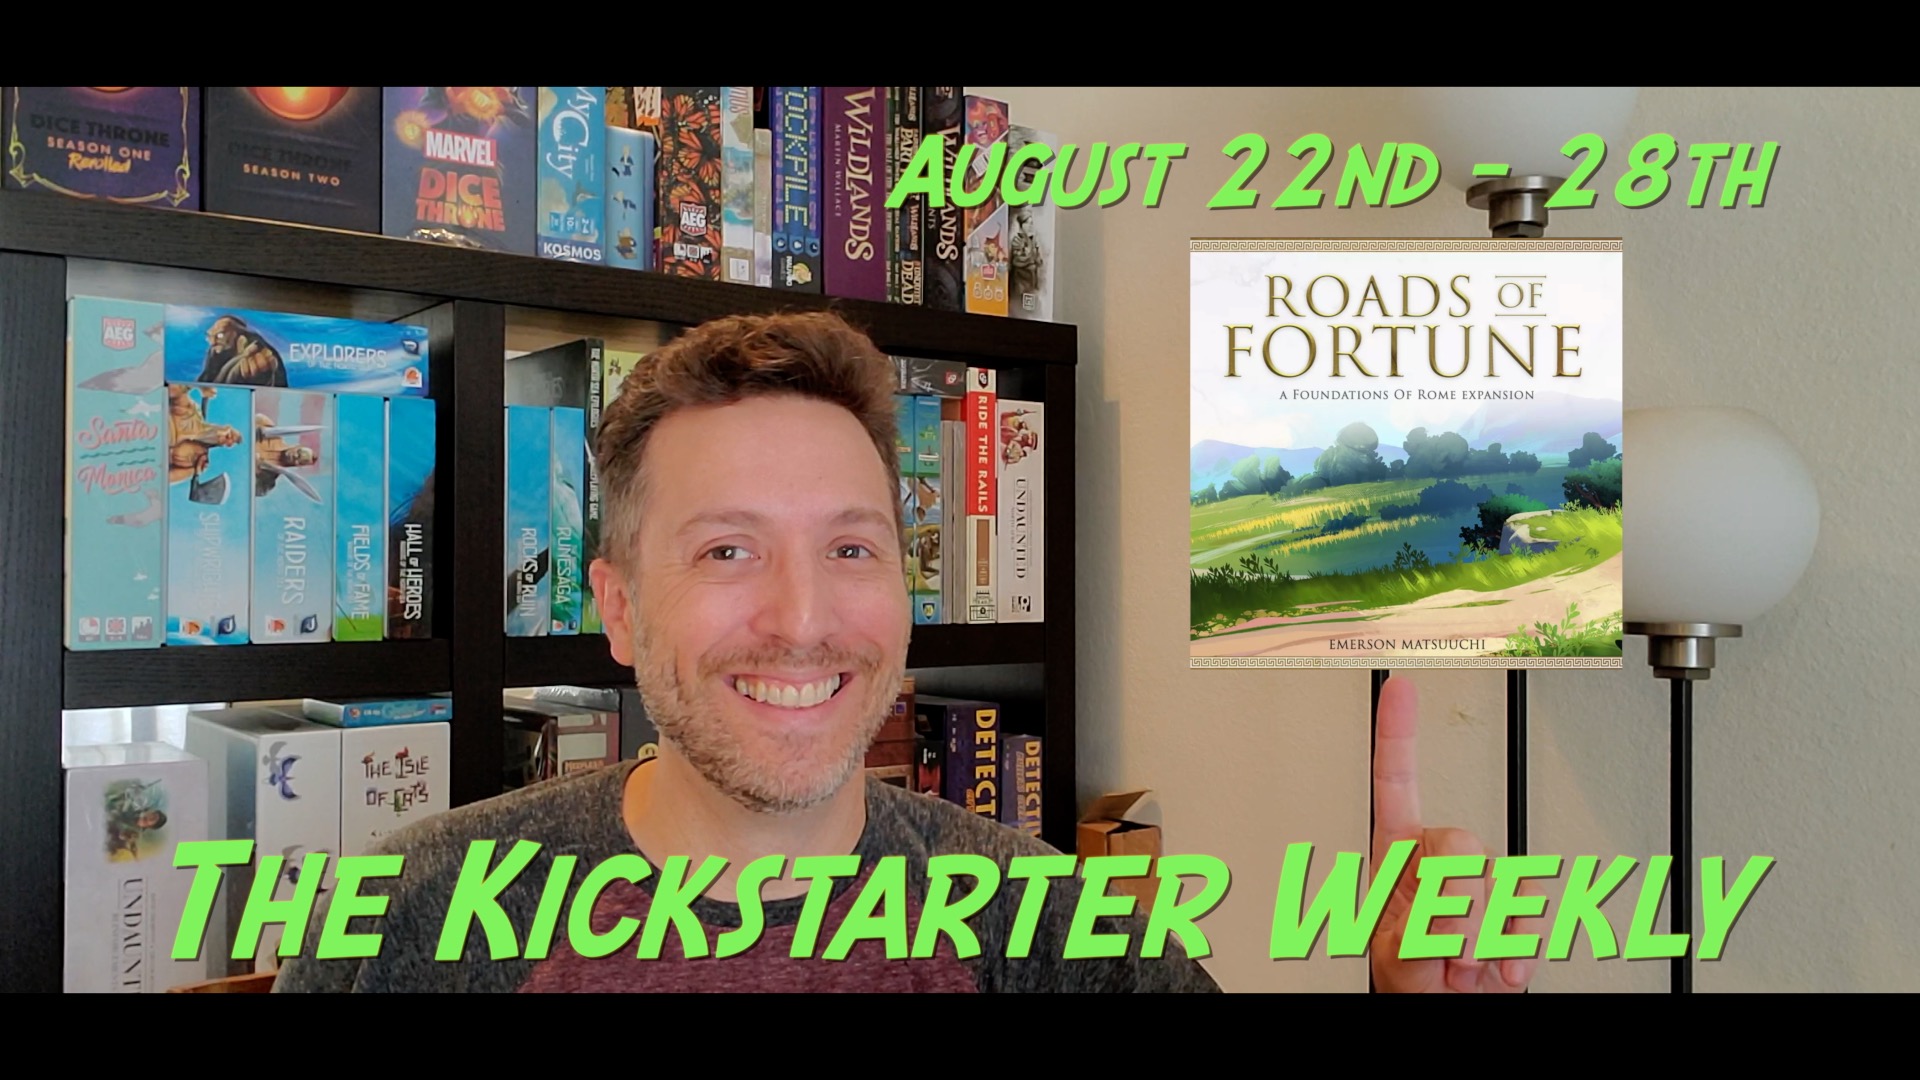 The Kickstarter Weekly, August 22nd – 28th